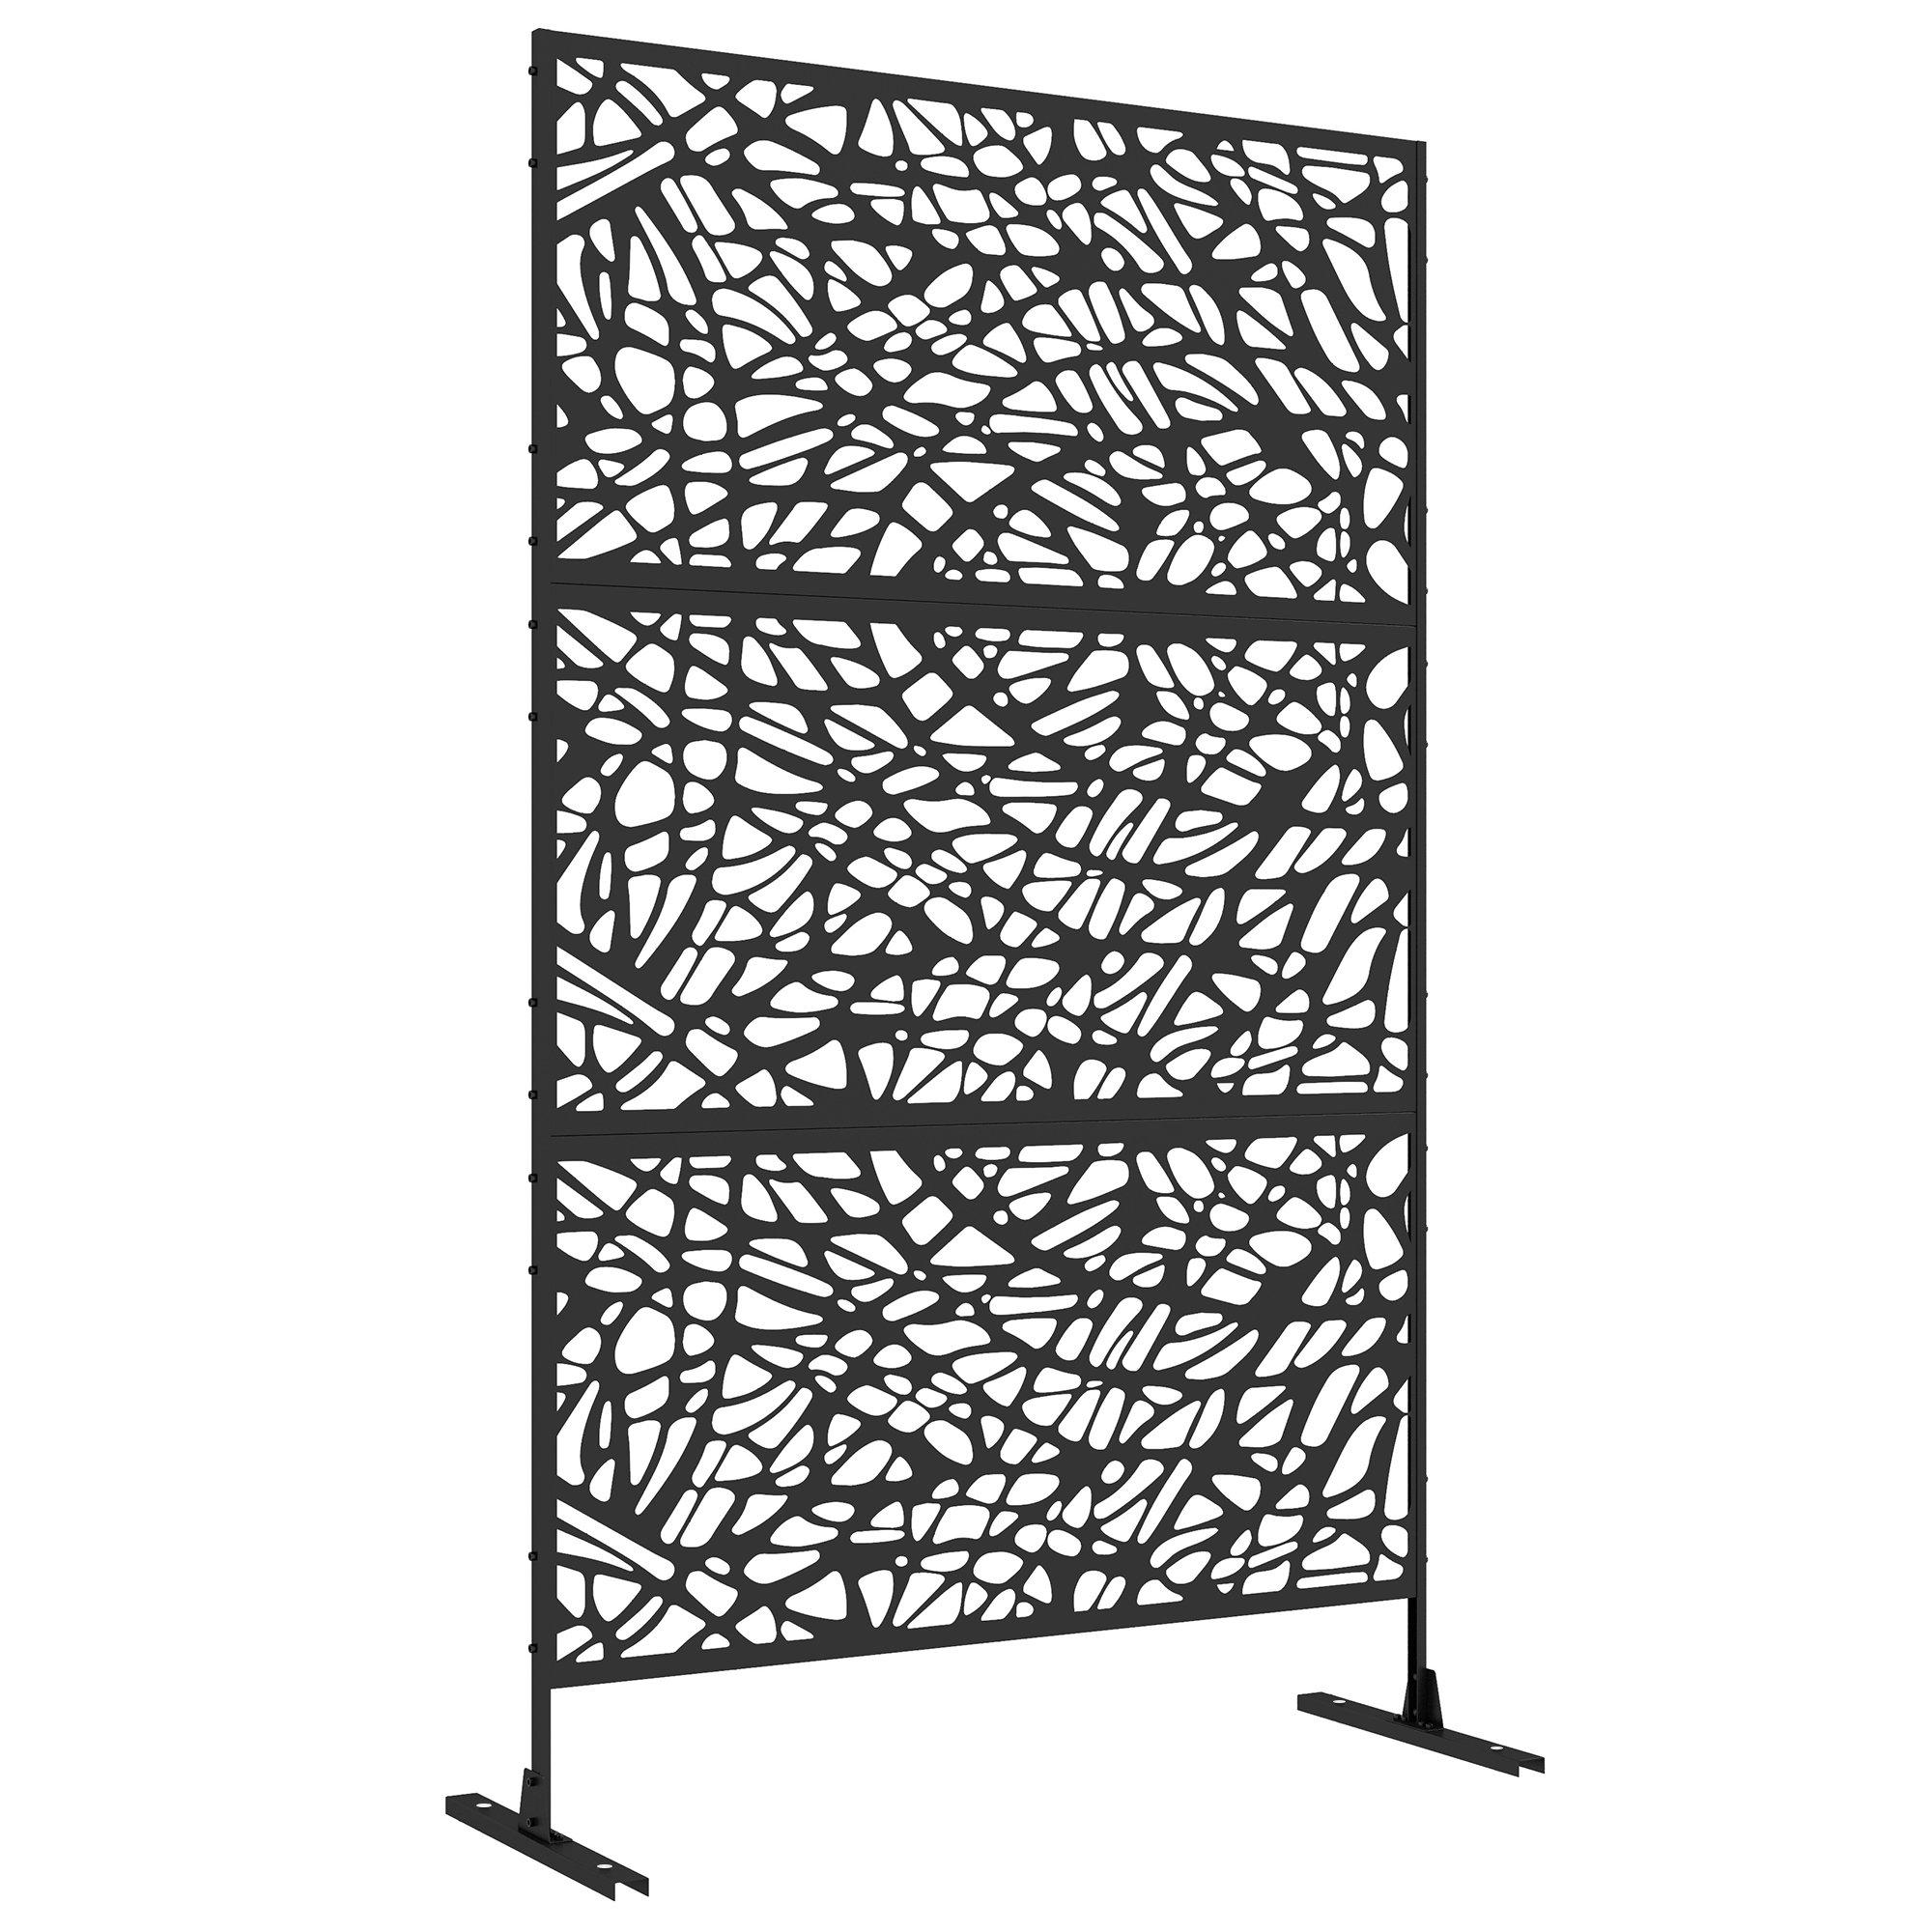 6.5FT Metal Outdoor Privacy Screen Panel w/ Stand, Twisted Lines